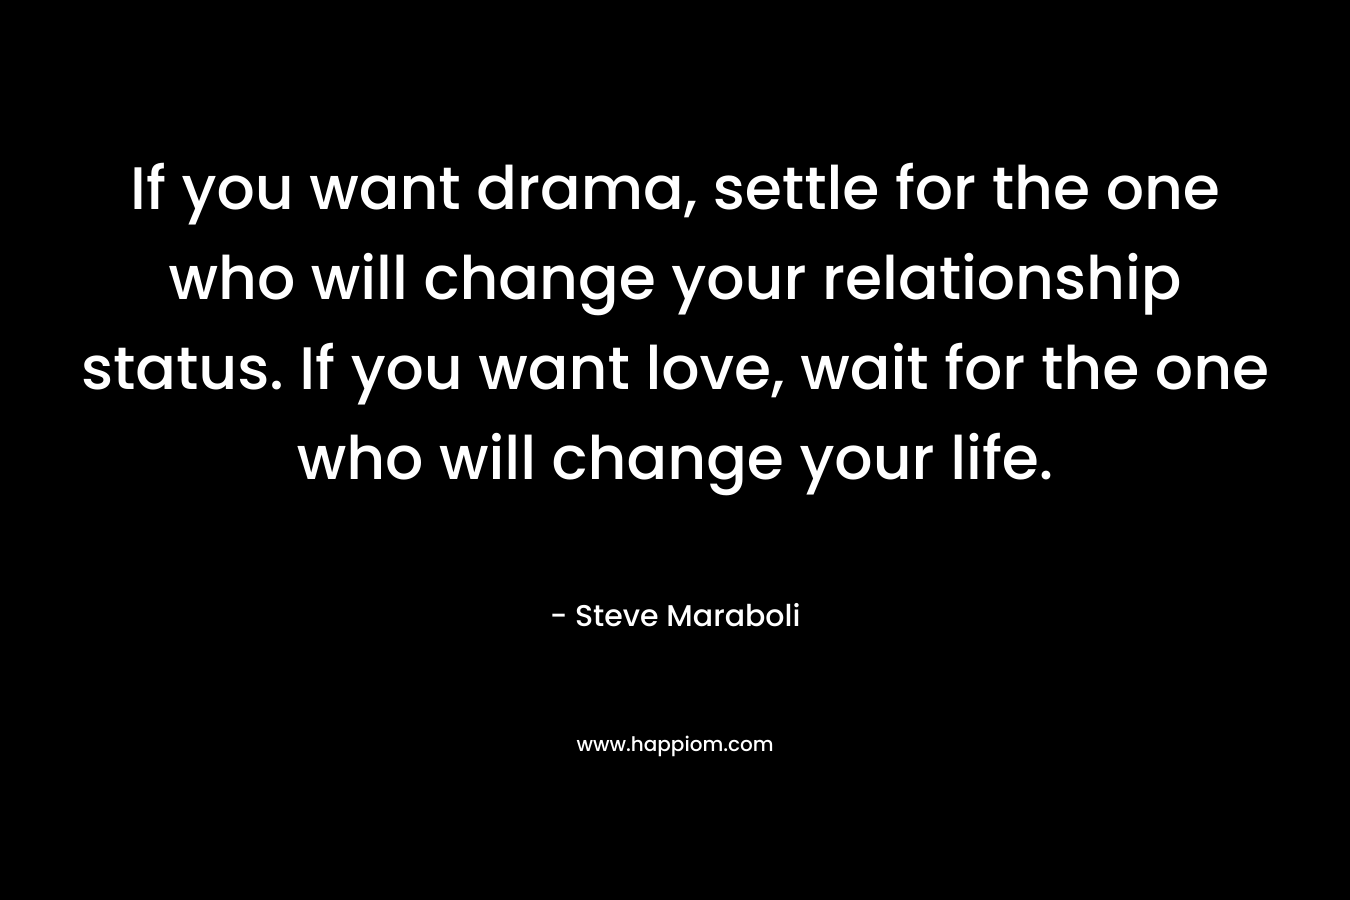 If you want drama, settle for the one who will change your relationship status. If you want love, wait for the one who will change your life.